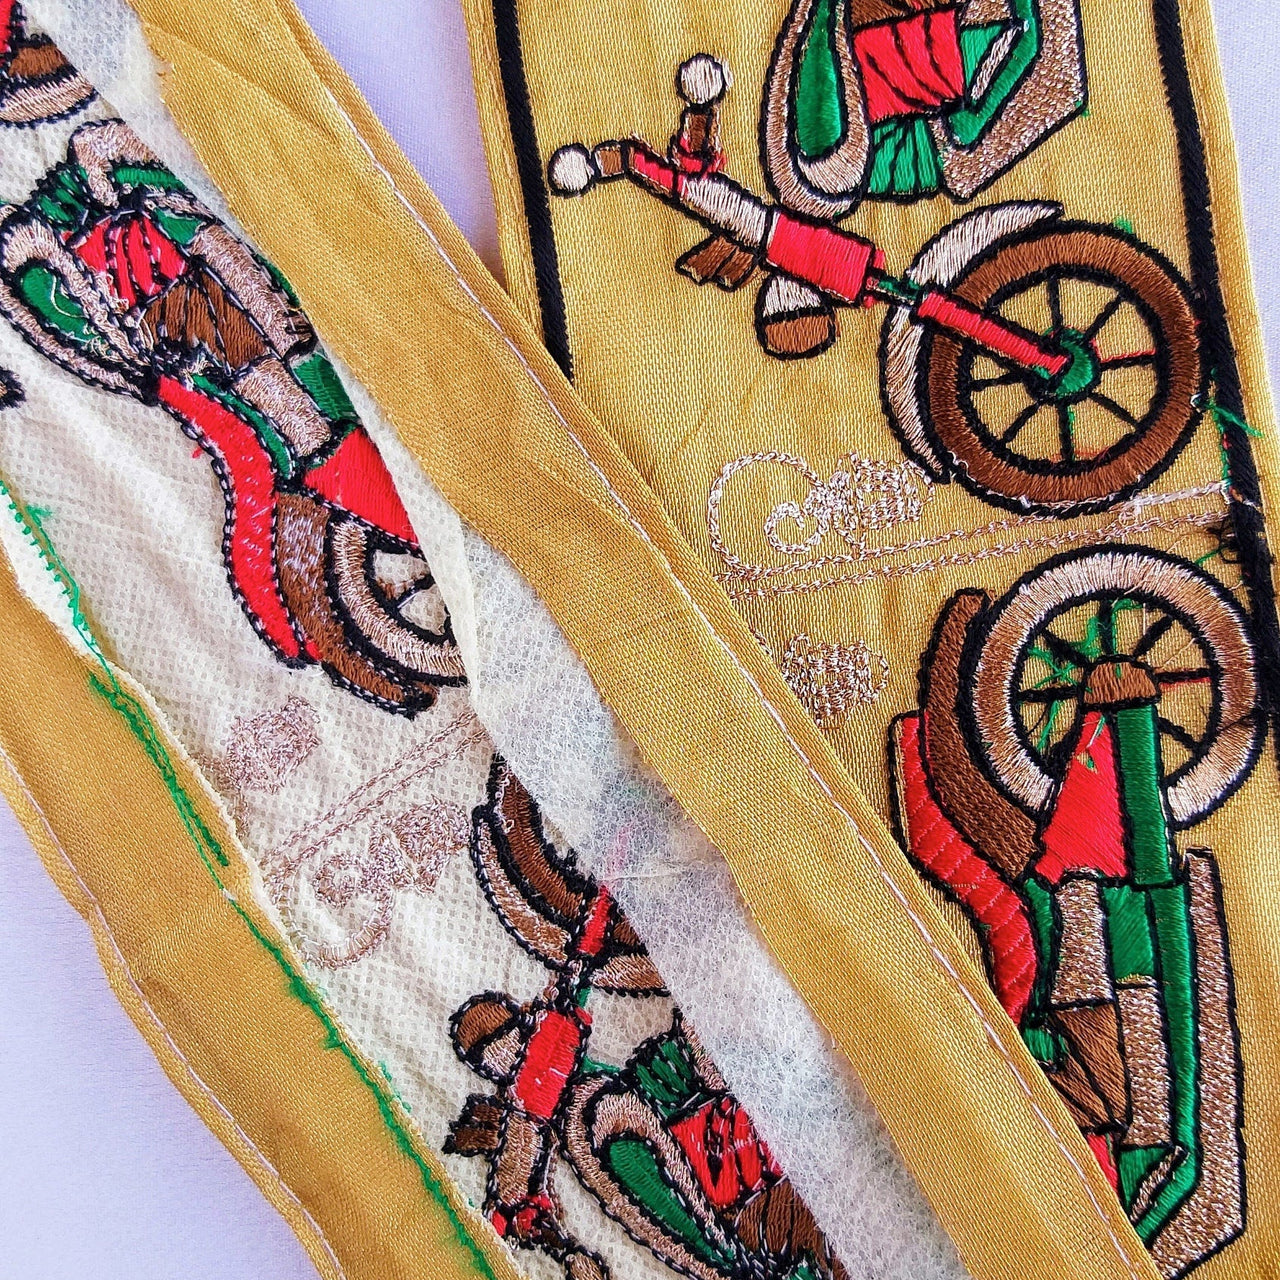 Beige Fabric trim with Embroidered Motorbikes - Brown, Red, Light Gold & Green